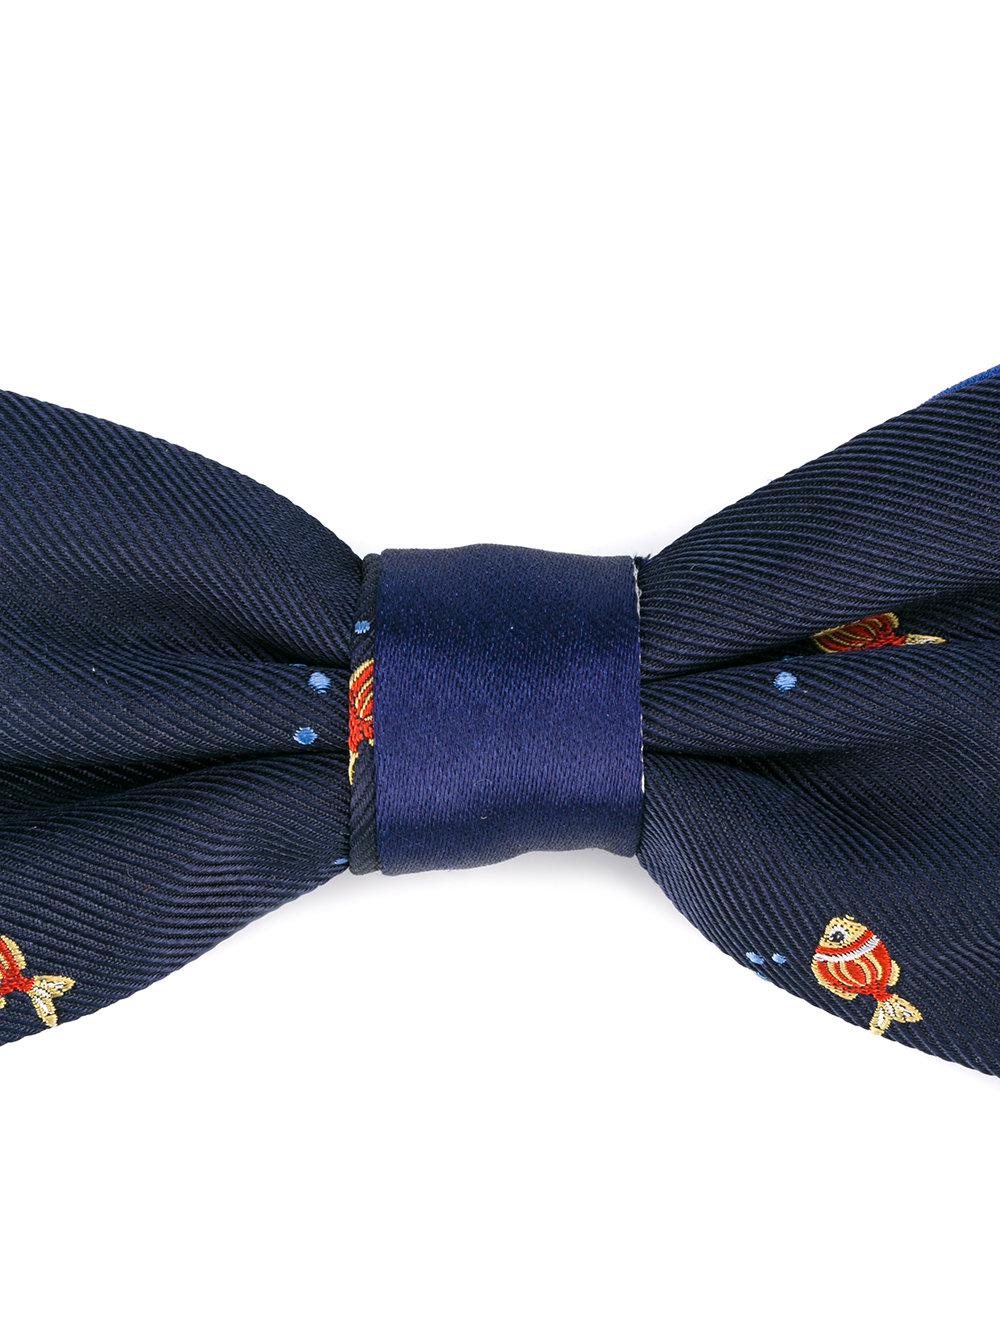 Lyst - Canali Woven Fish Bow Tie in Blue for Men